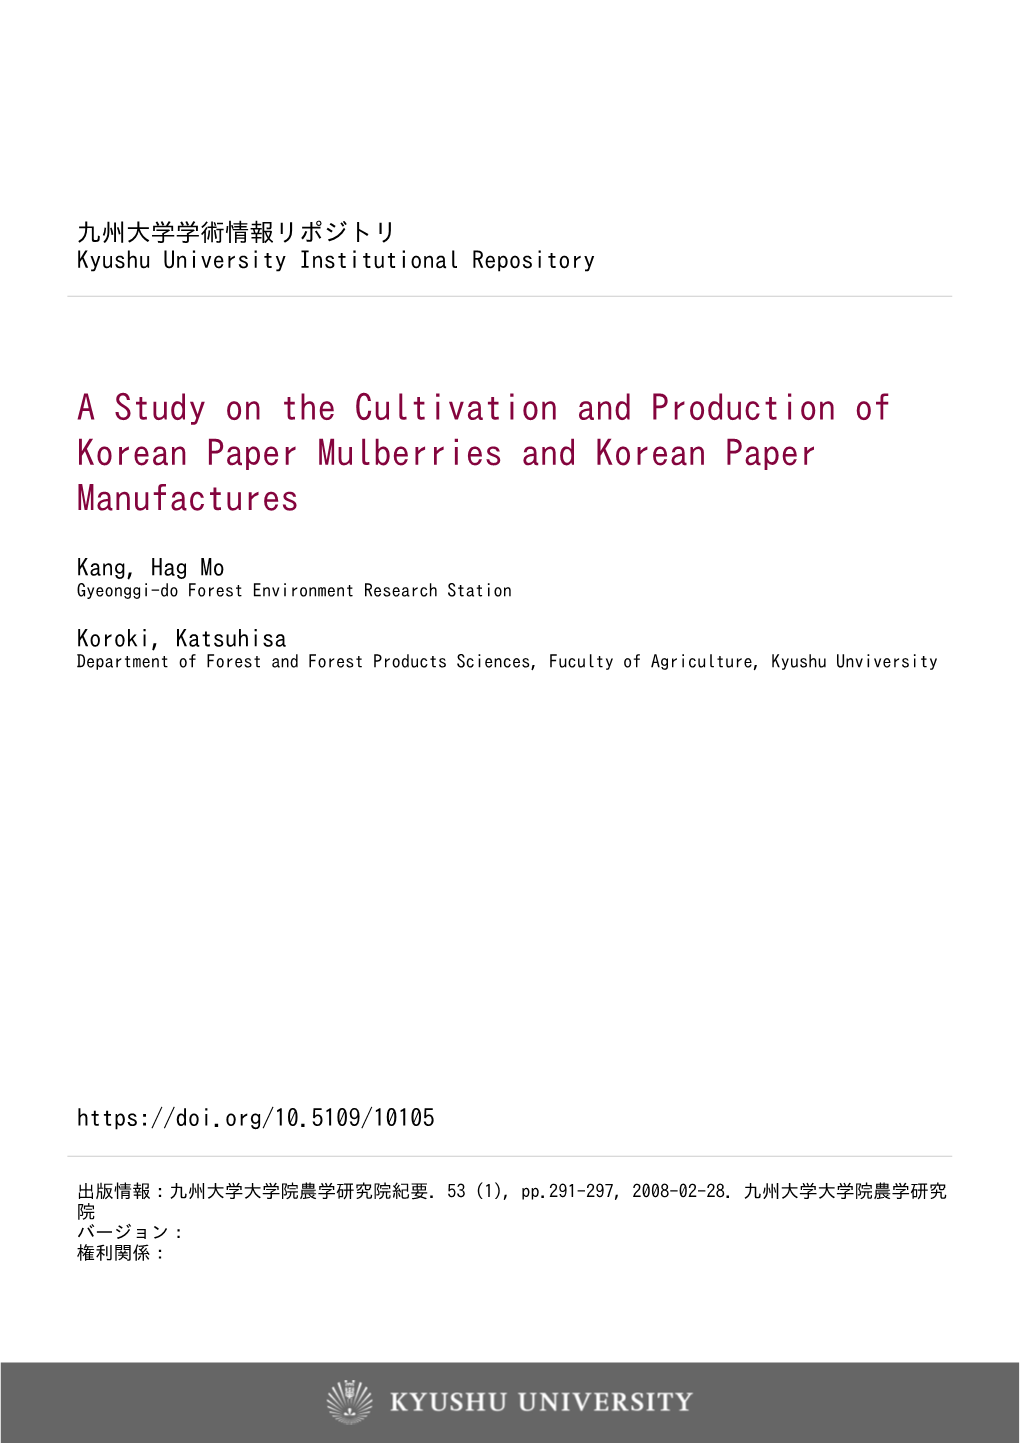 A Study on the Cultivation and Production of Korean Paper Mulberries and Korean Paper Manufactures